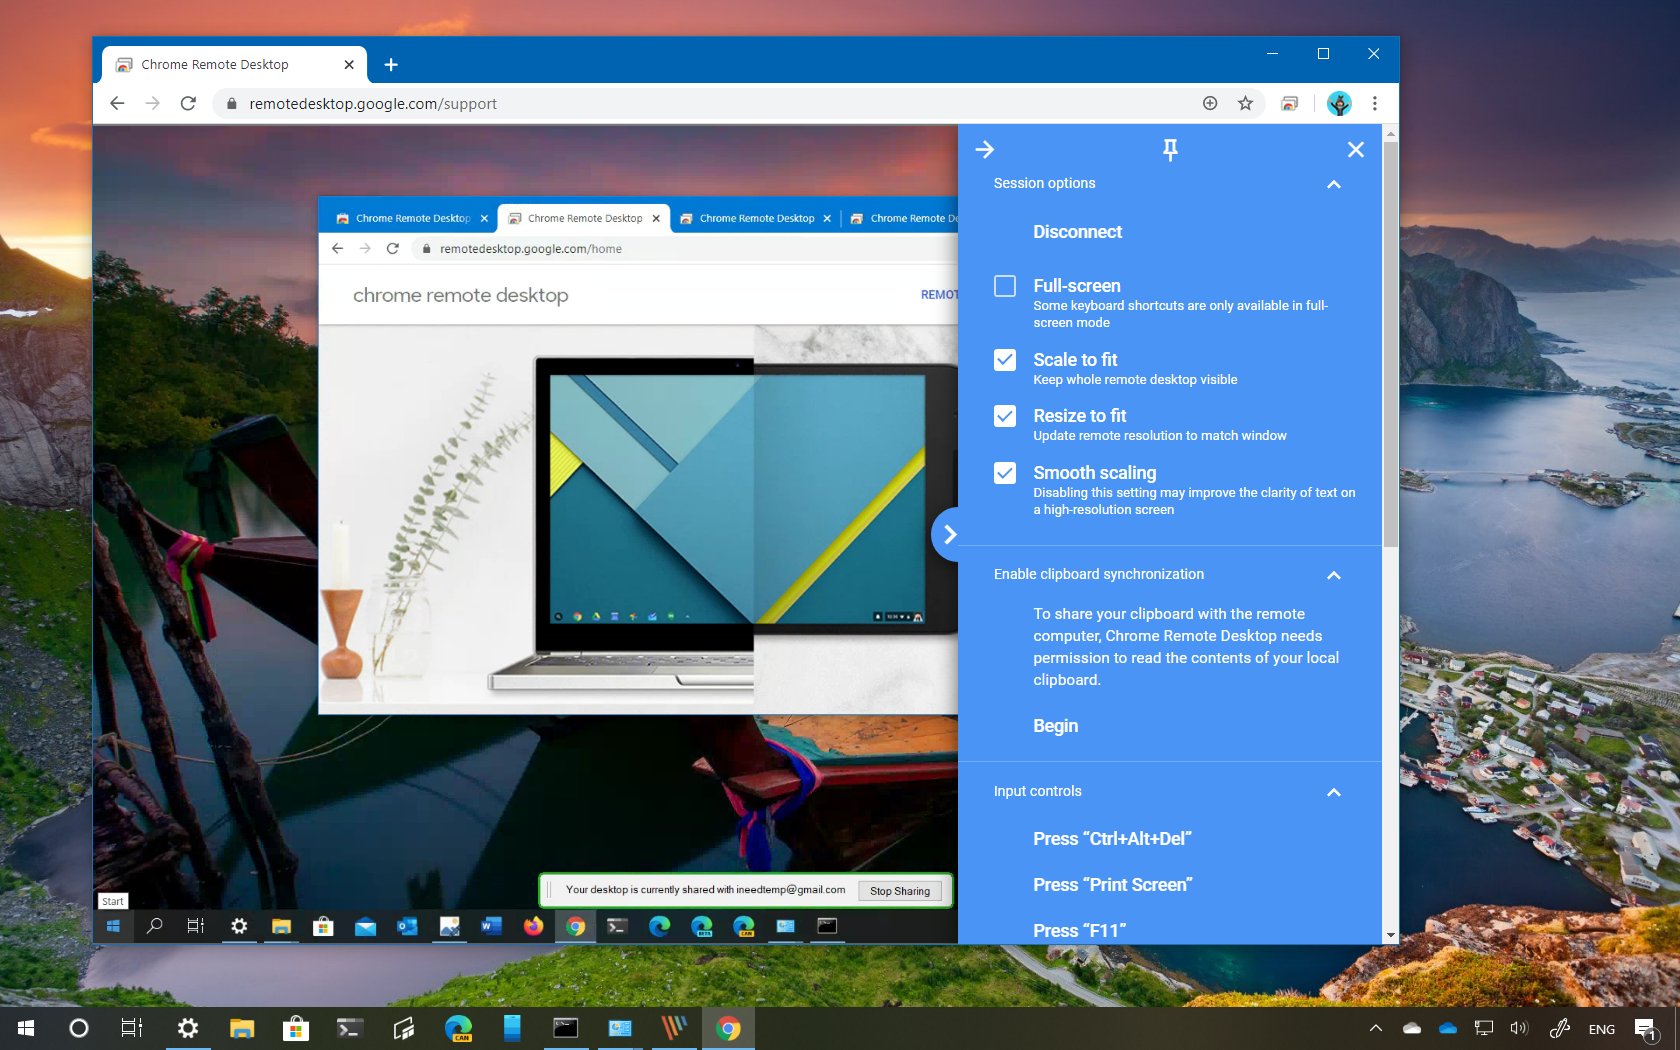 How To Chrome Remote Desktop To Help Users On Windows 10 - Pureinfotech